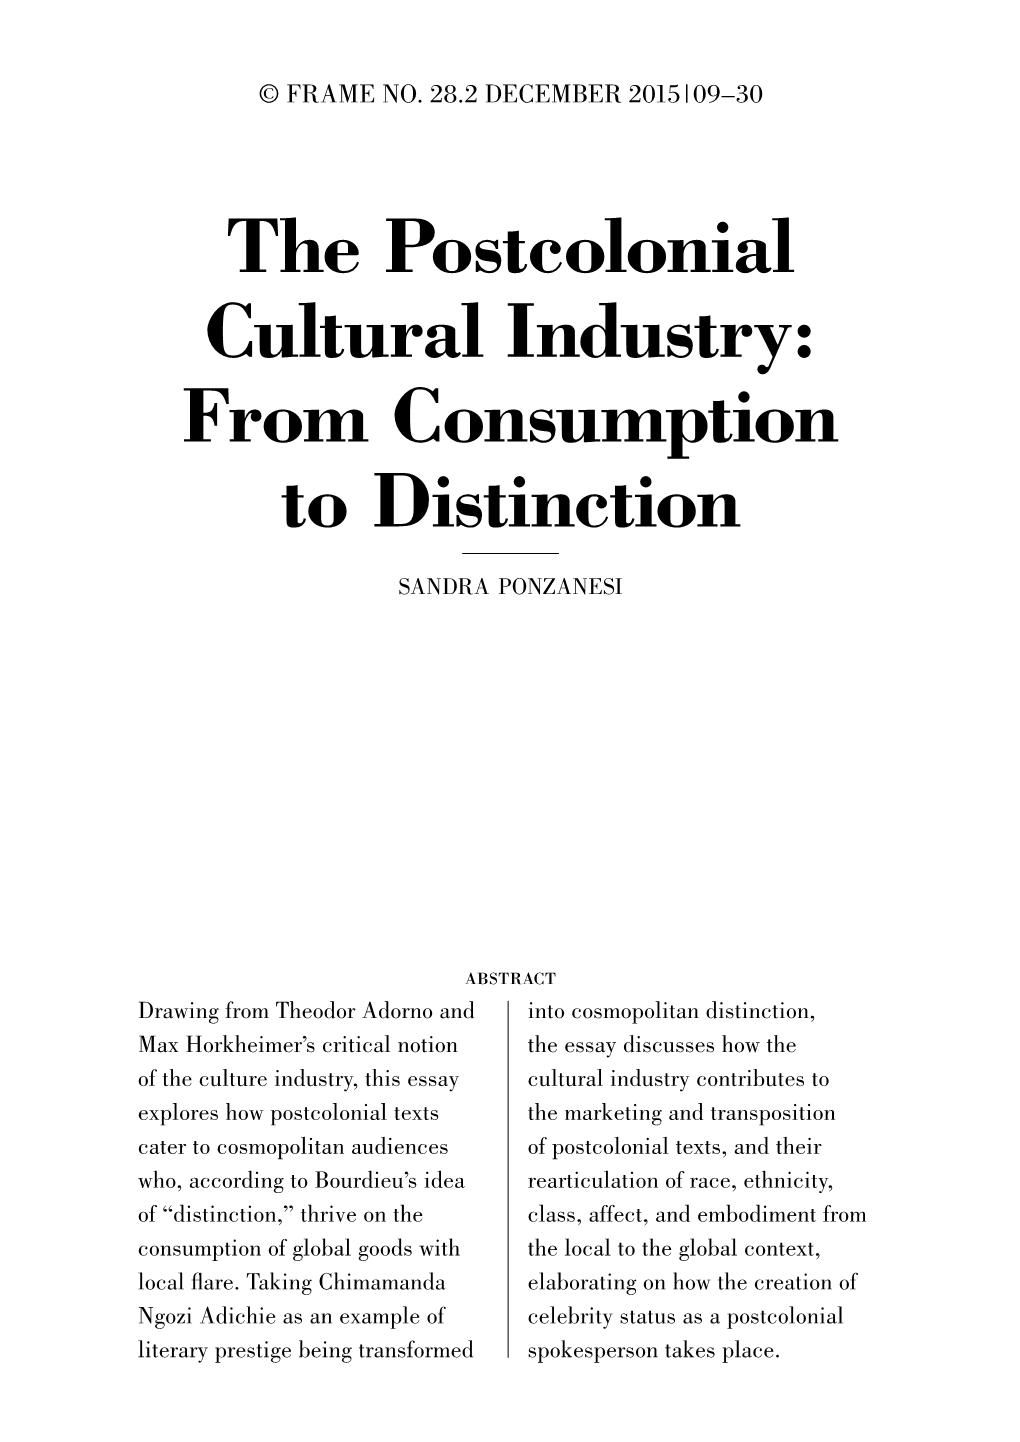 The Postcolonial Cultural Industry: from Consumption to Distinction